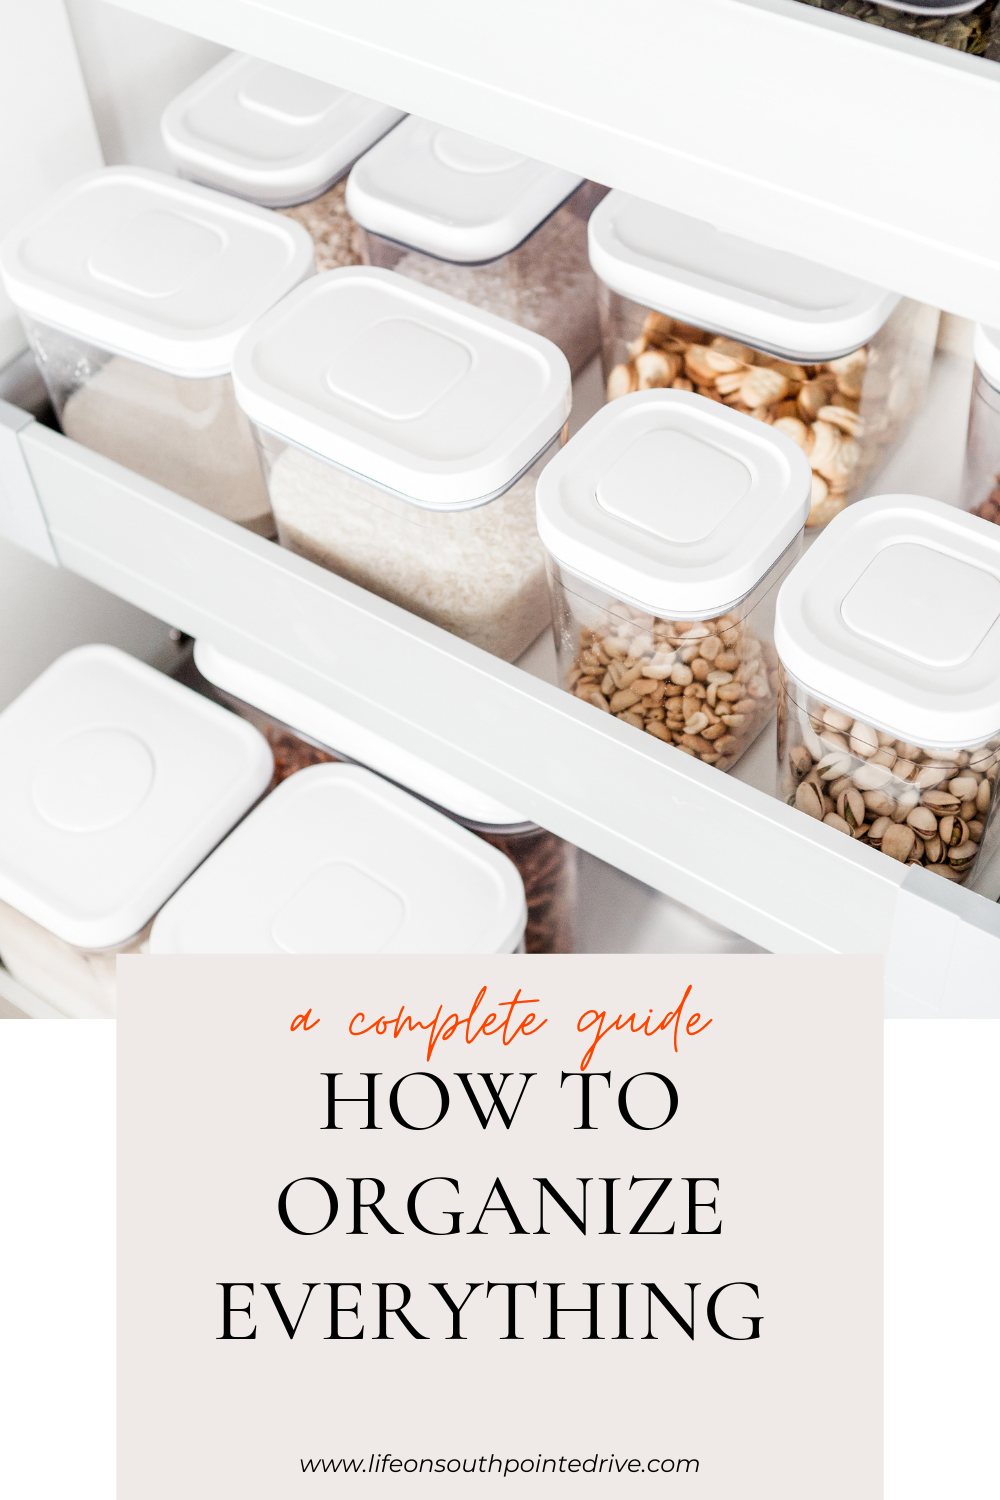 Complete Guide on How t Organize Everything!